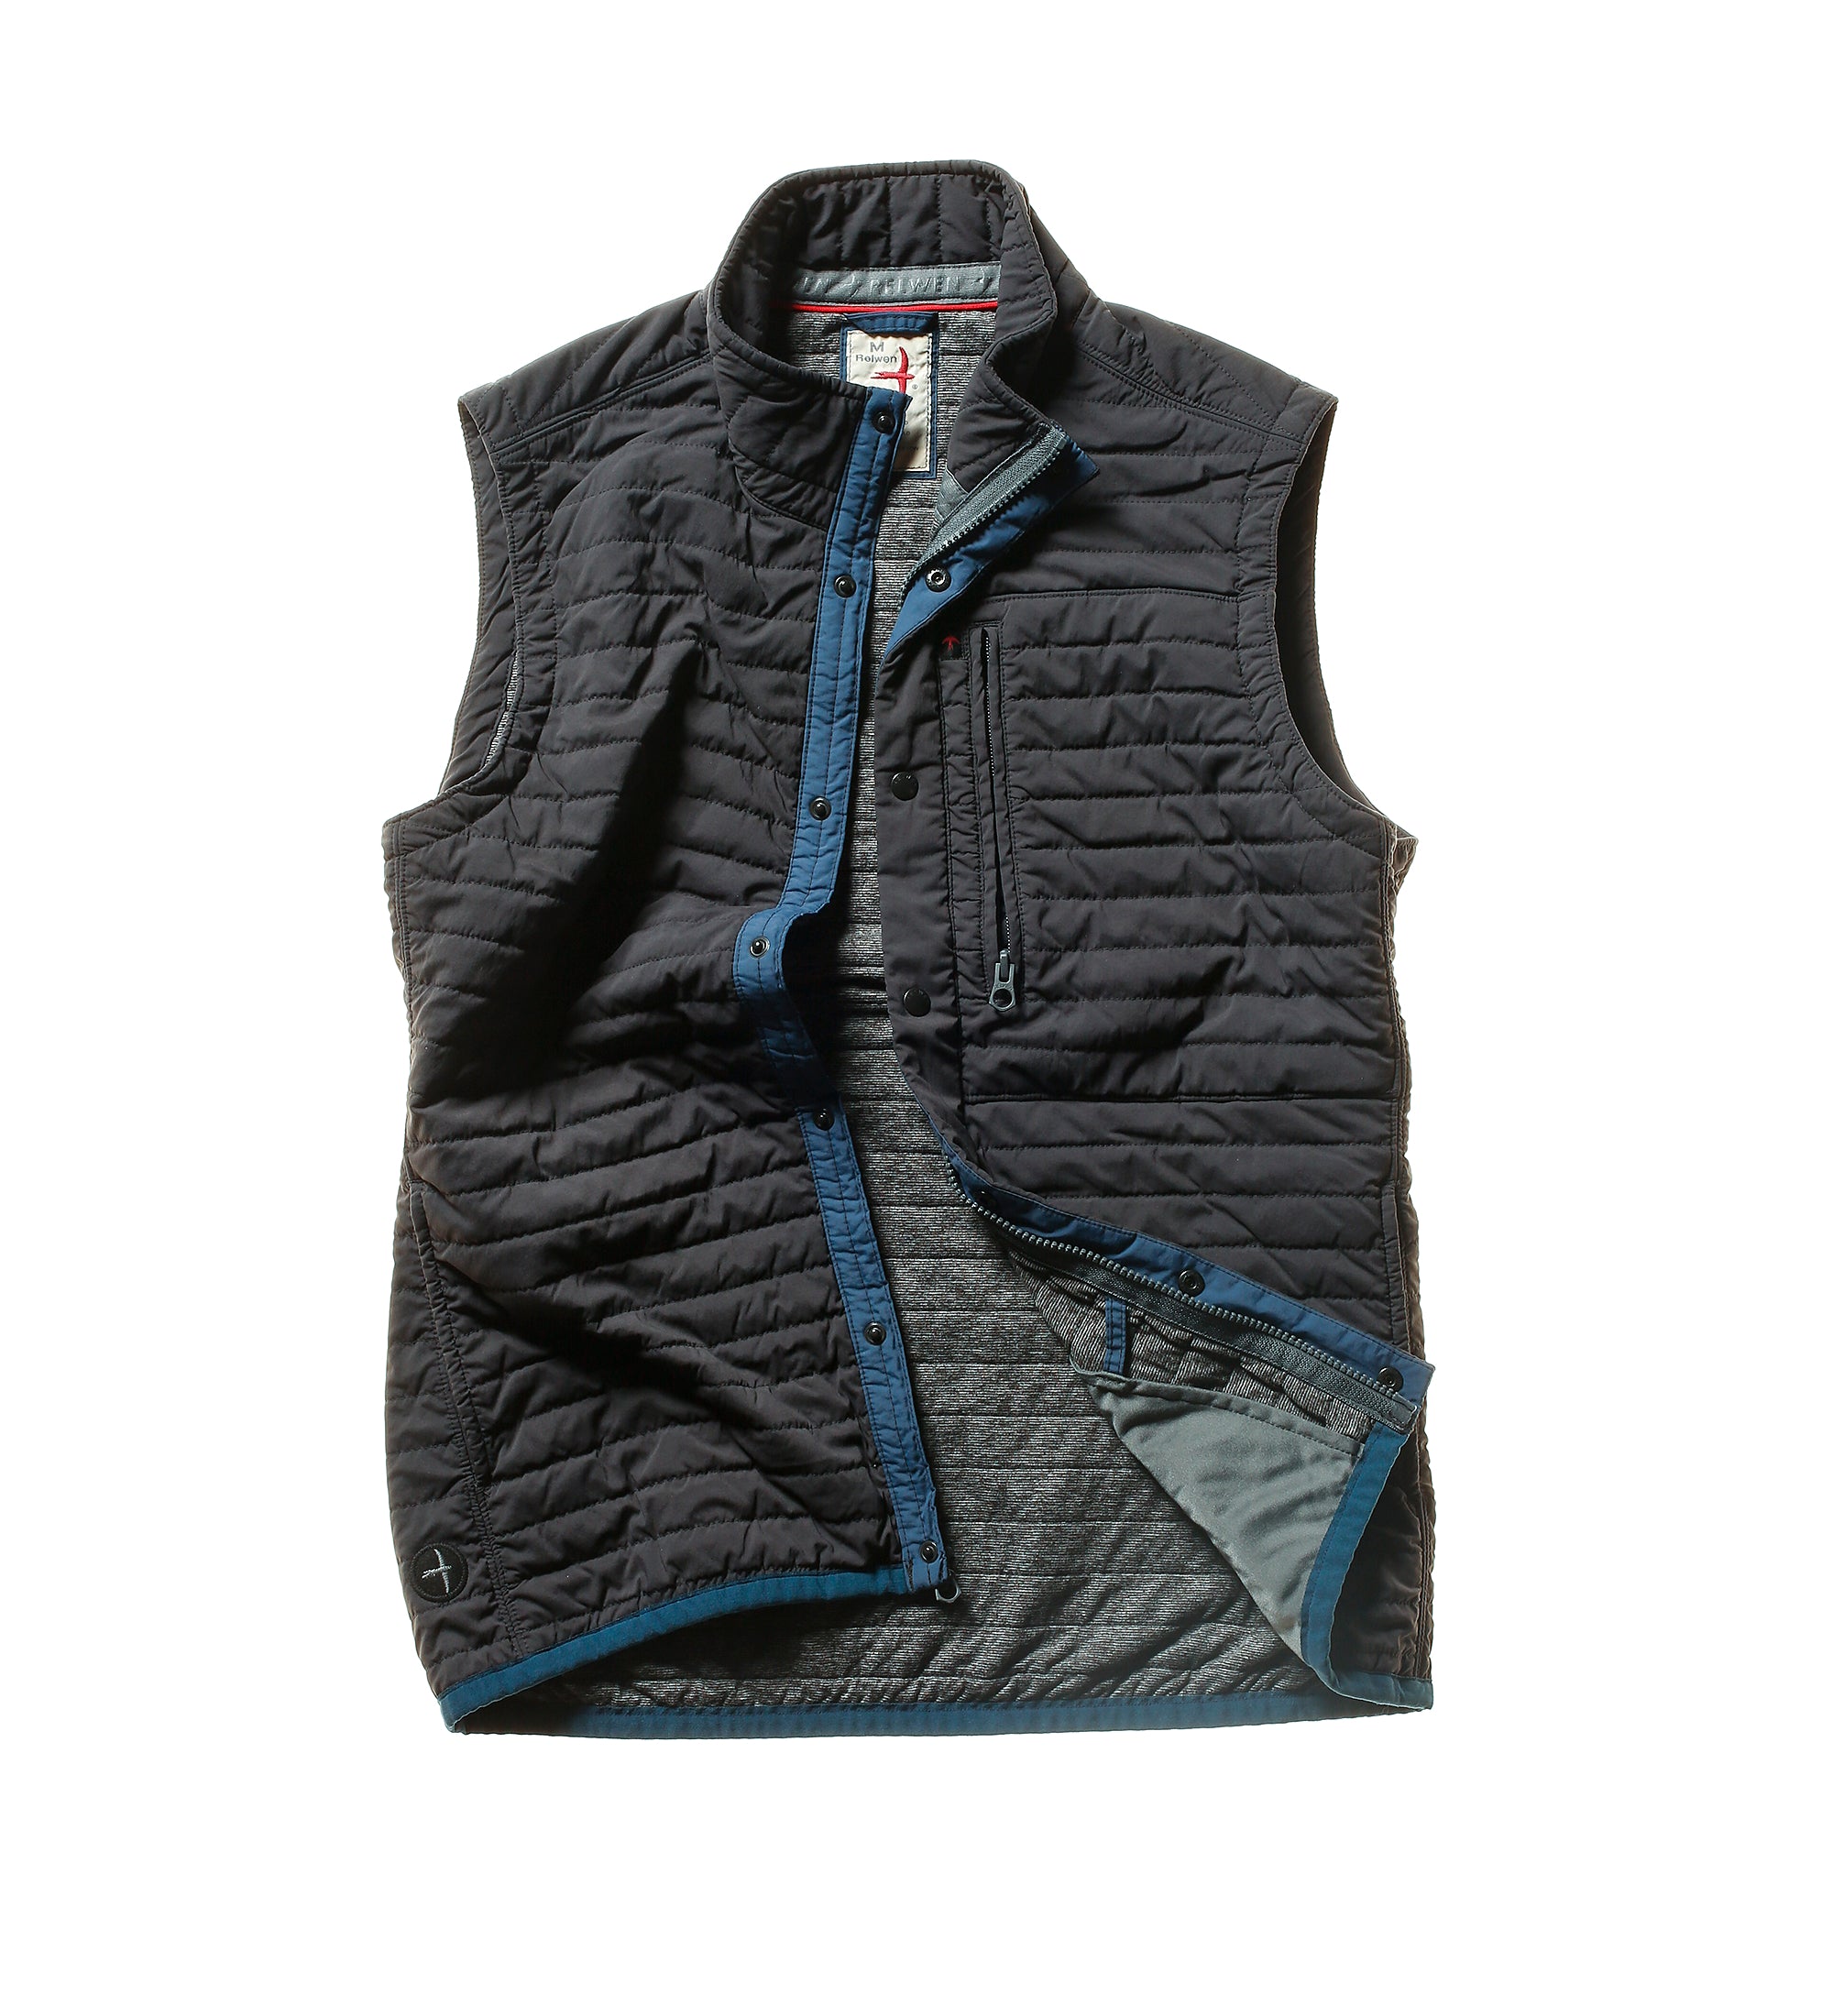 Relwen Windzip Quilted Vest – Seattle Thread Company